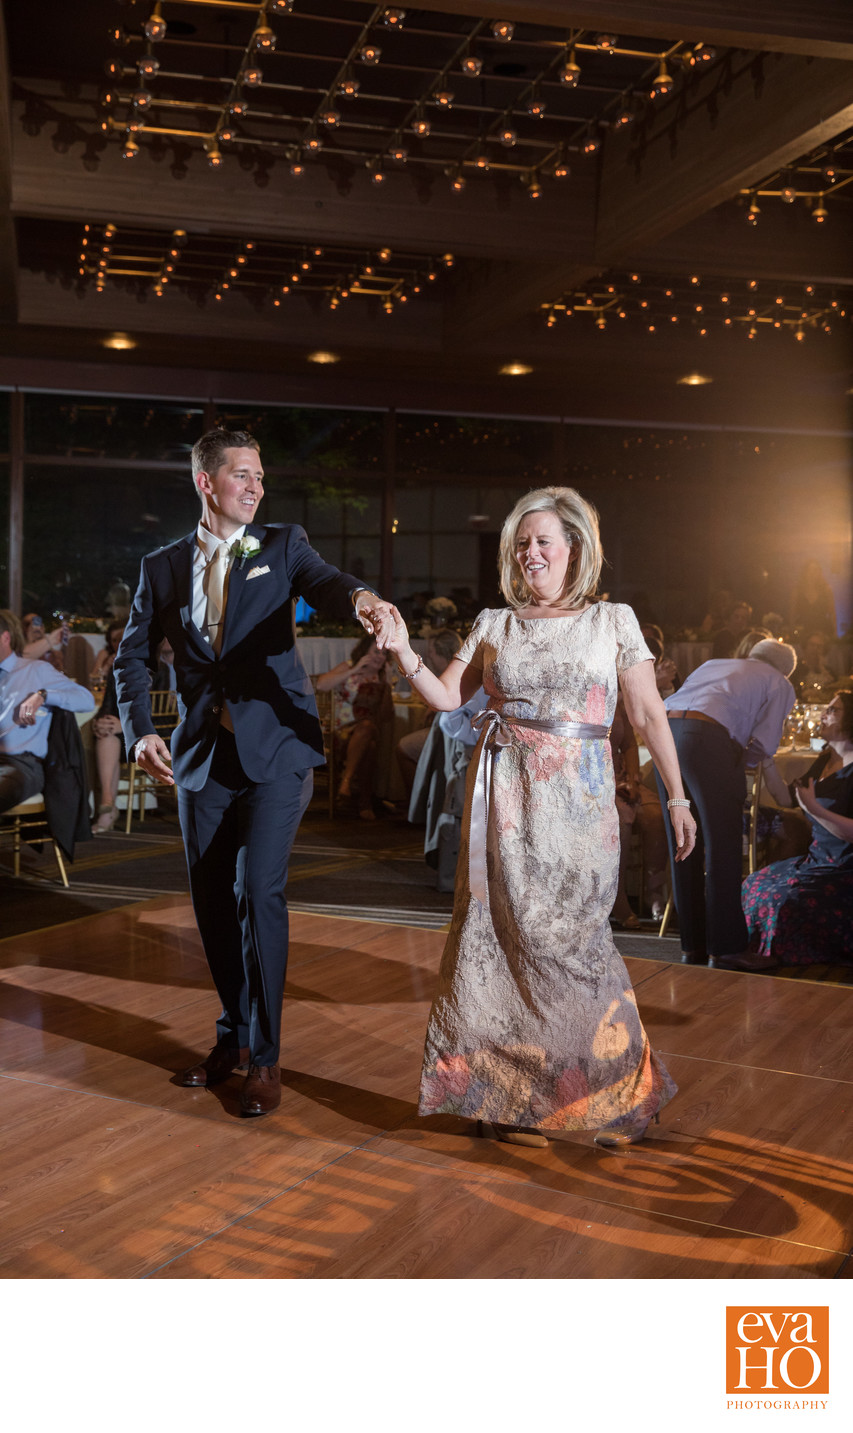 Mother and Son Dance